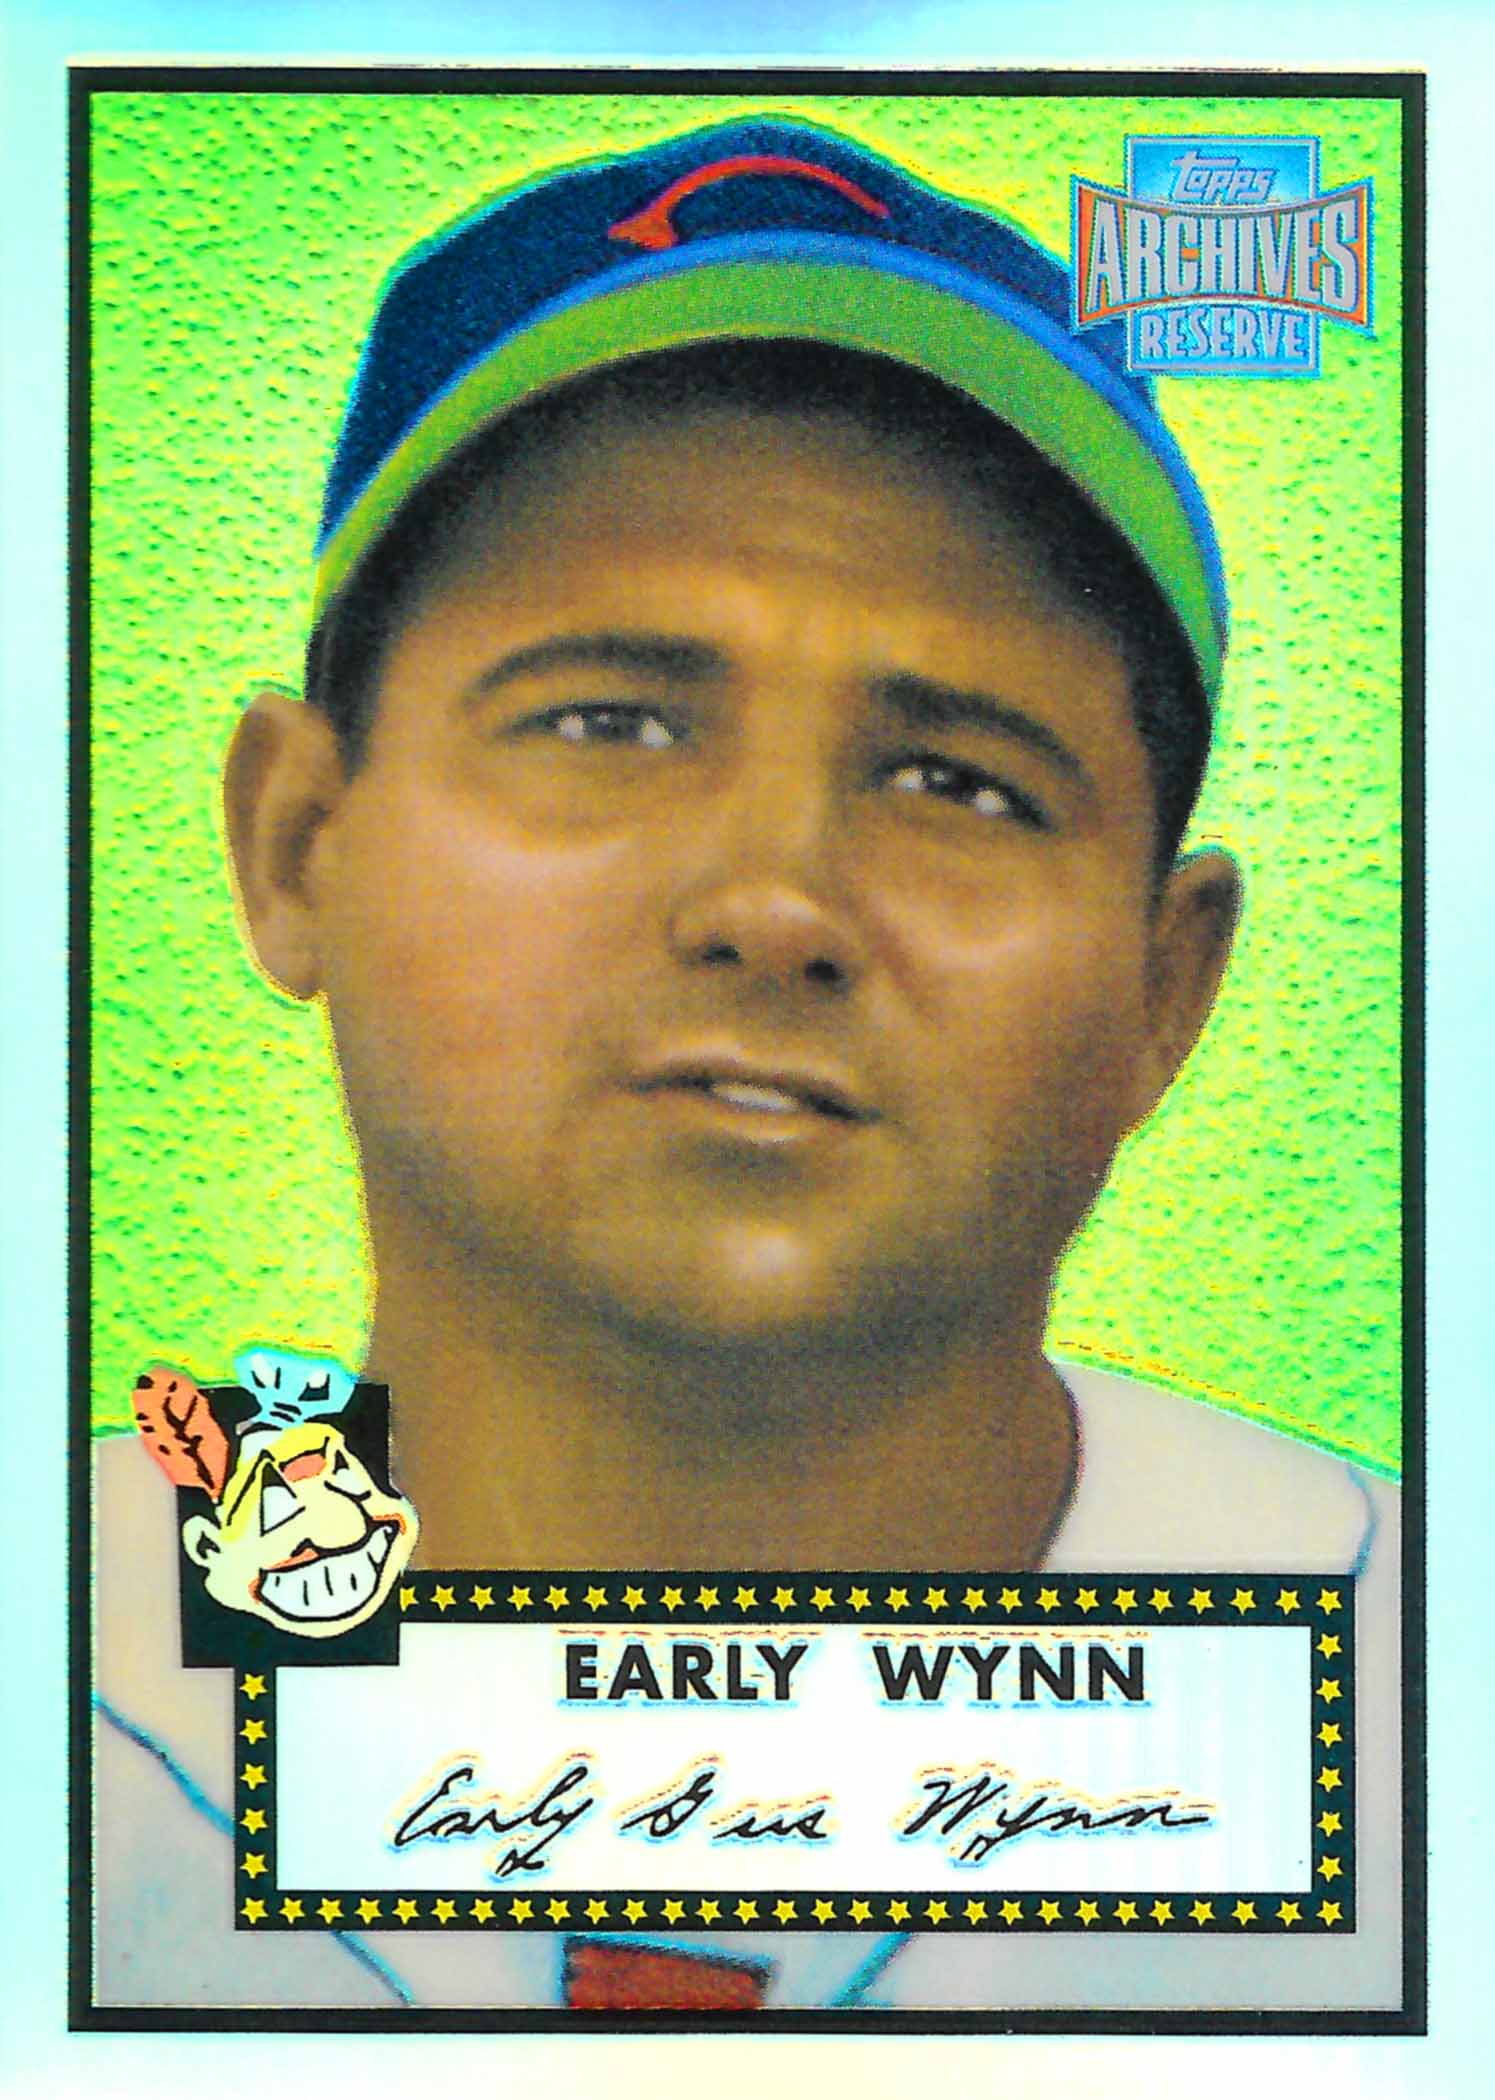 2001 Topps Archives Reserve